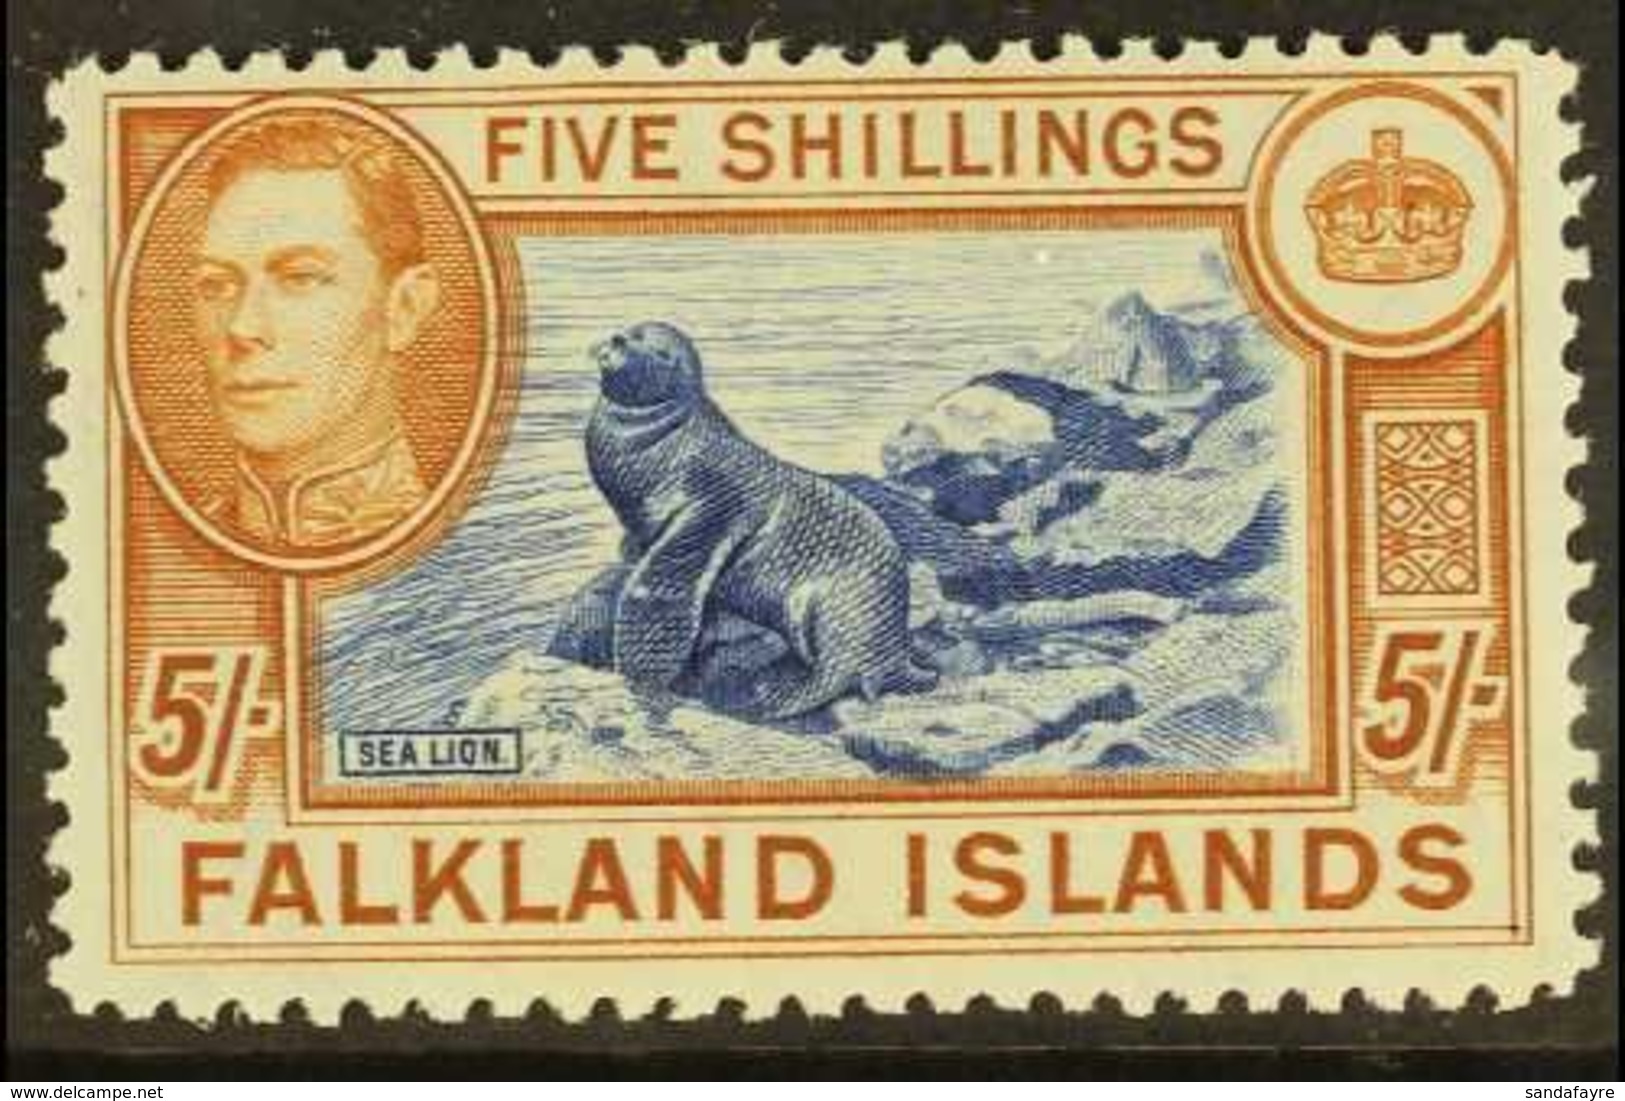 1938-50 5s Dull Blue & Yellow Brown On Greyish Paper, SG 161c, Fine Lightly Hinged Mint For More Images, Please Visit Ht - Falklandinseln